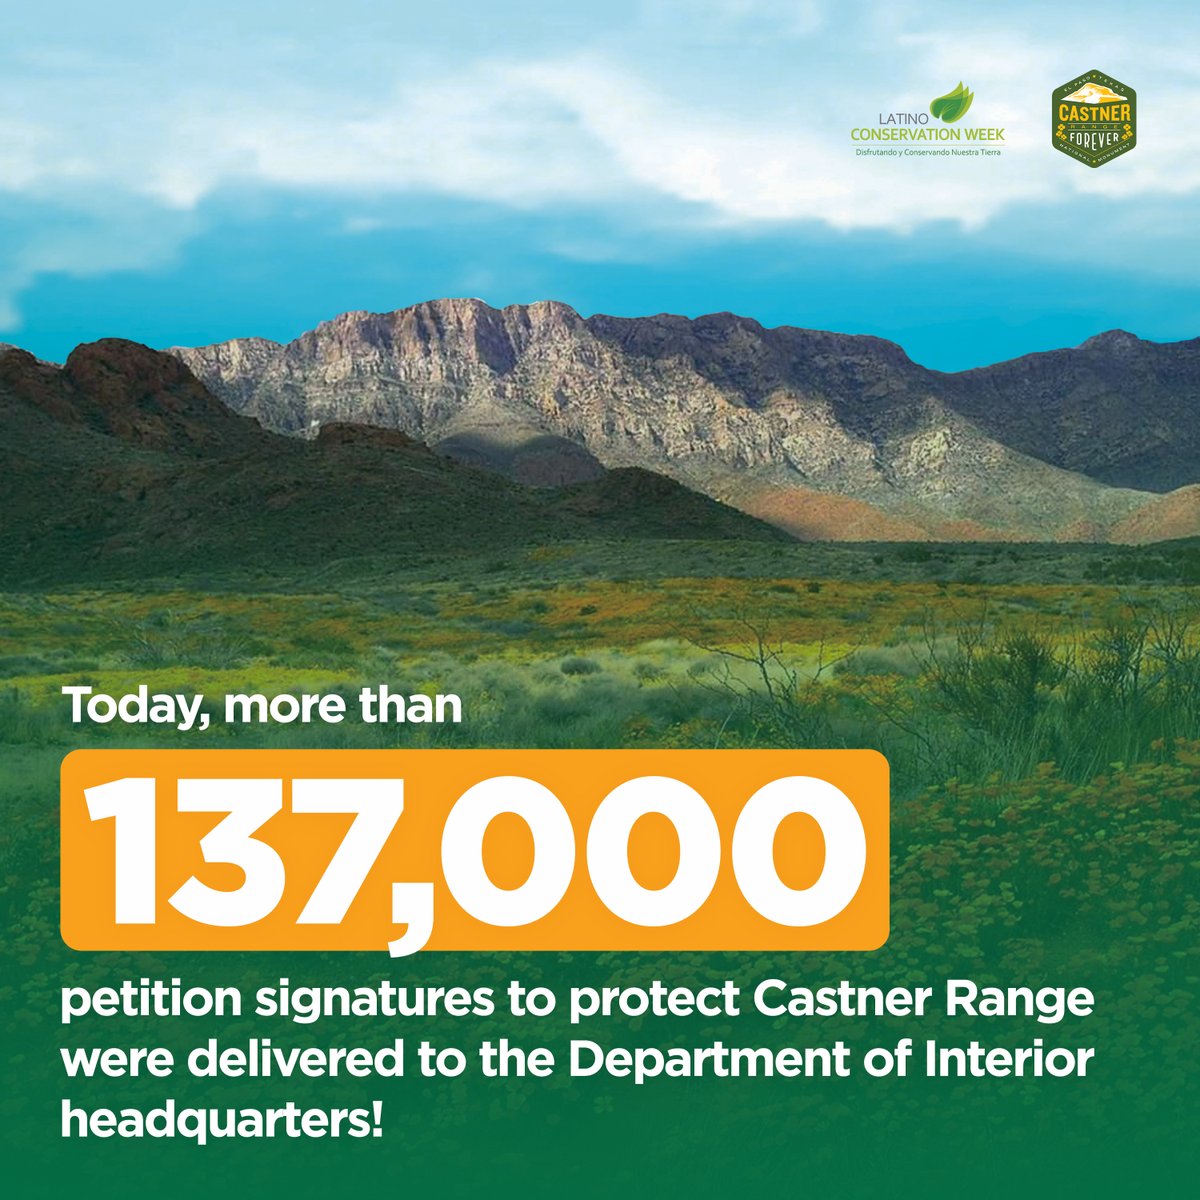 It's time for @POTUS to declare #CastnerRange a National Monument! It has overwhelming community support from Ysleta Del Sur Pueblo to @RepEscobar to the @ElPasoTXGov to faith leaders, veterans, and 46,000+ community members. #Castner4Ever